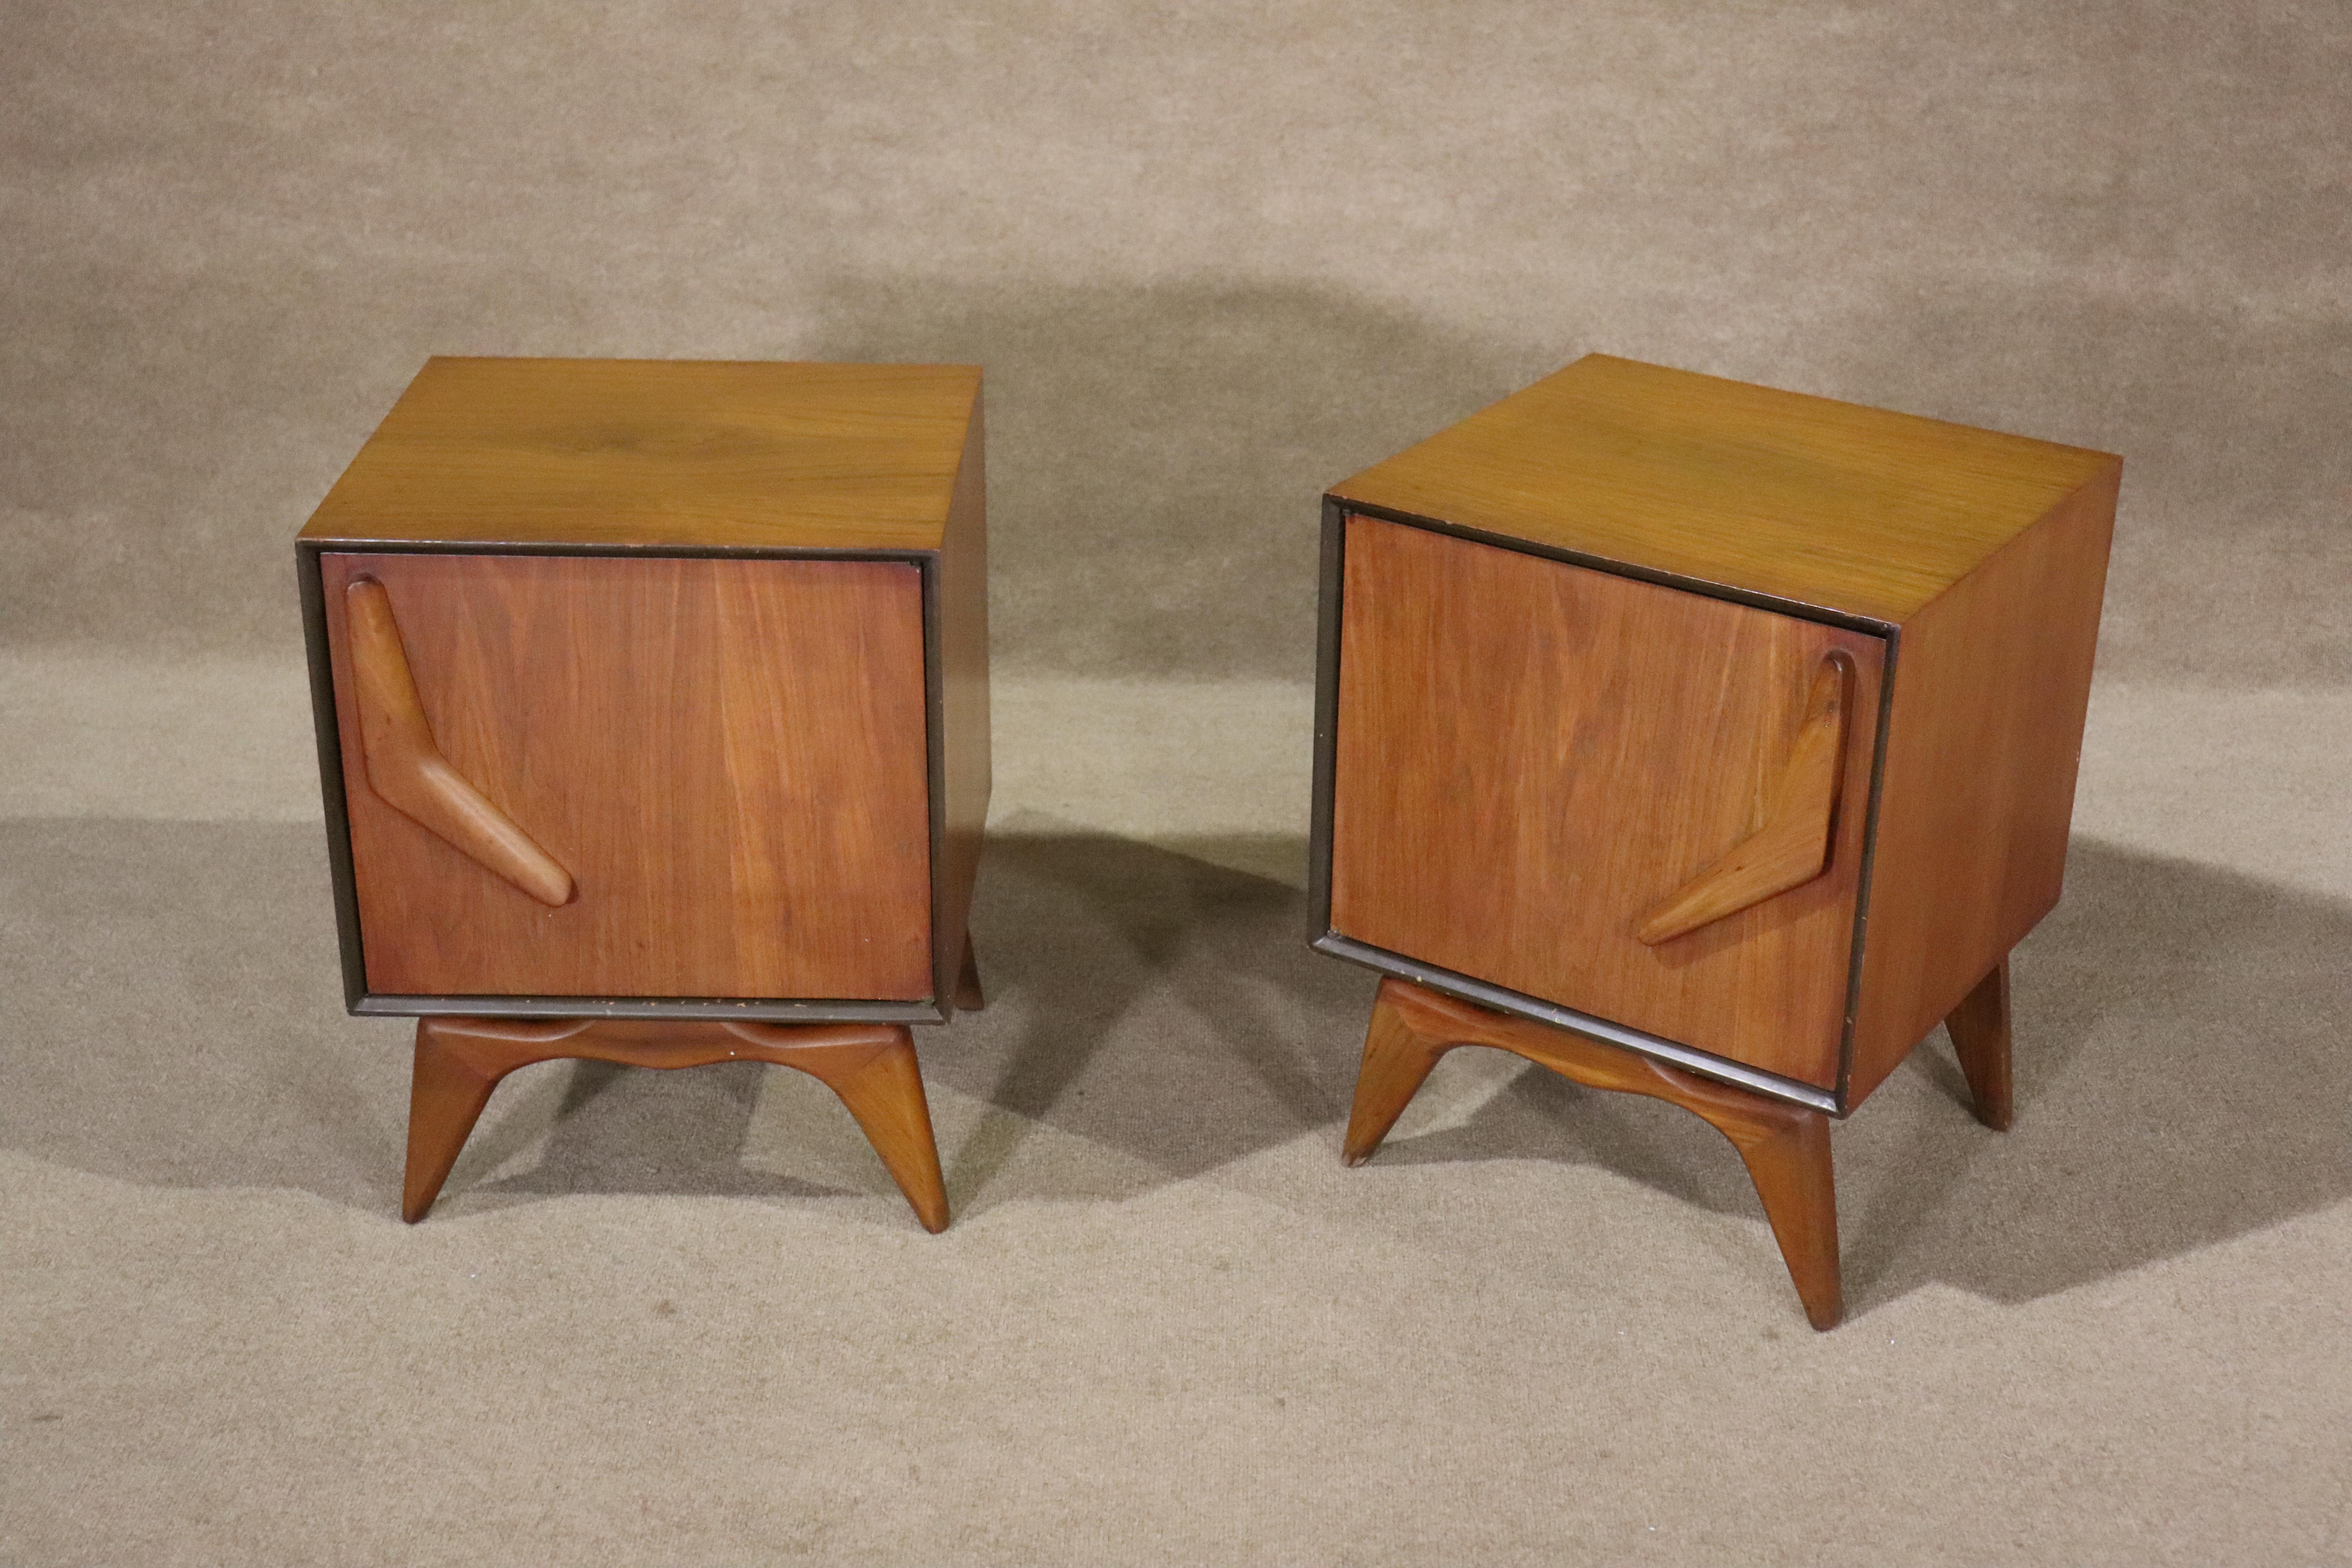 Mid-century modern bedside tables with beautifully sculpted base and matching boomerang handles. Cabinet is floating on the wood base.
Please confirm location NY or NJ